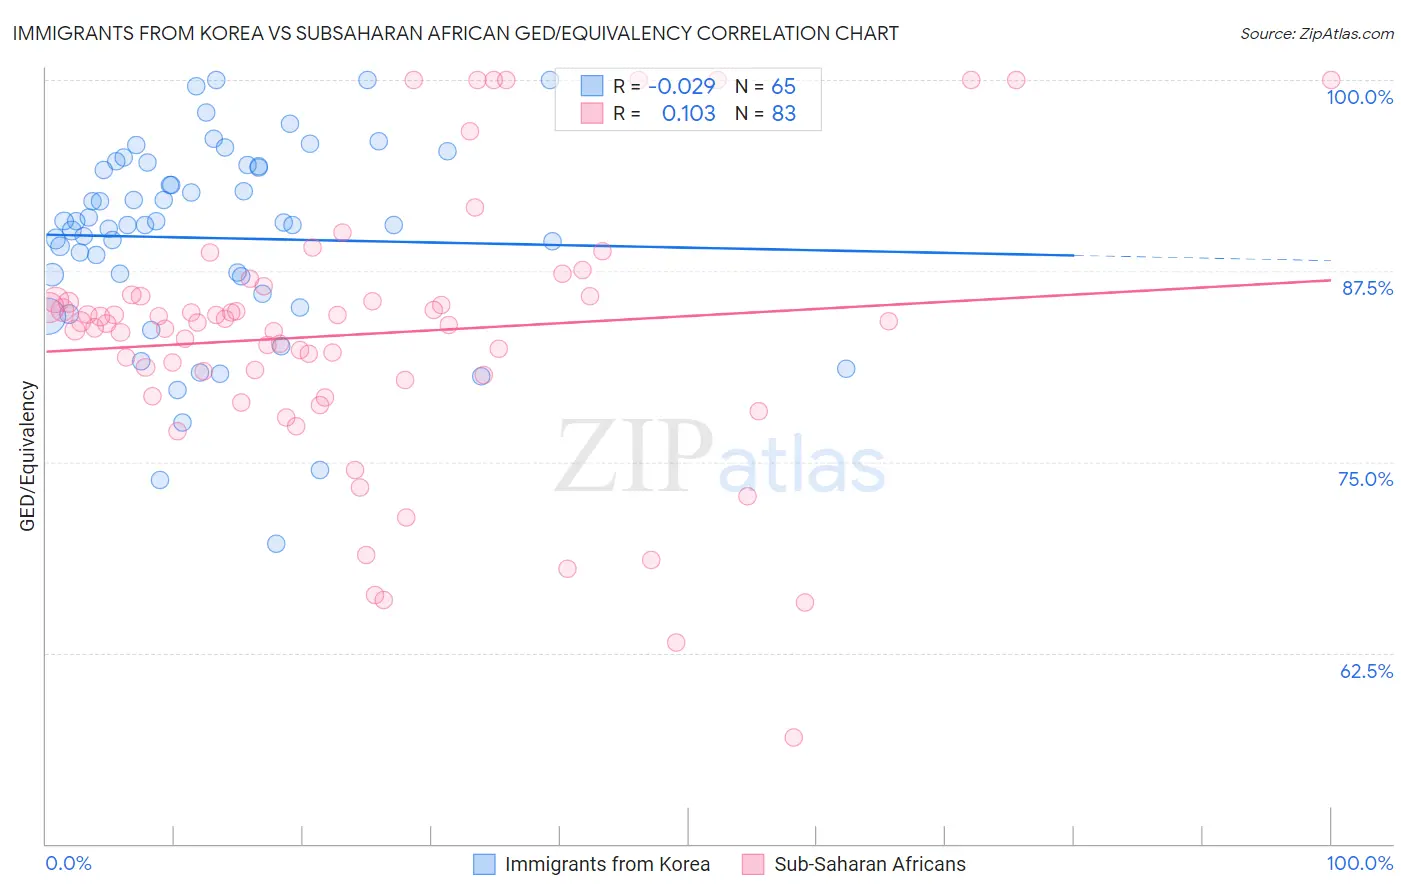 Immigrants from Korea vs Subsaharan African GED/Equivalency